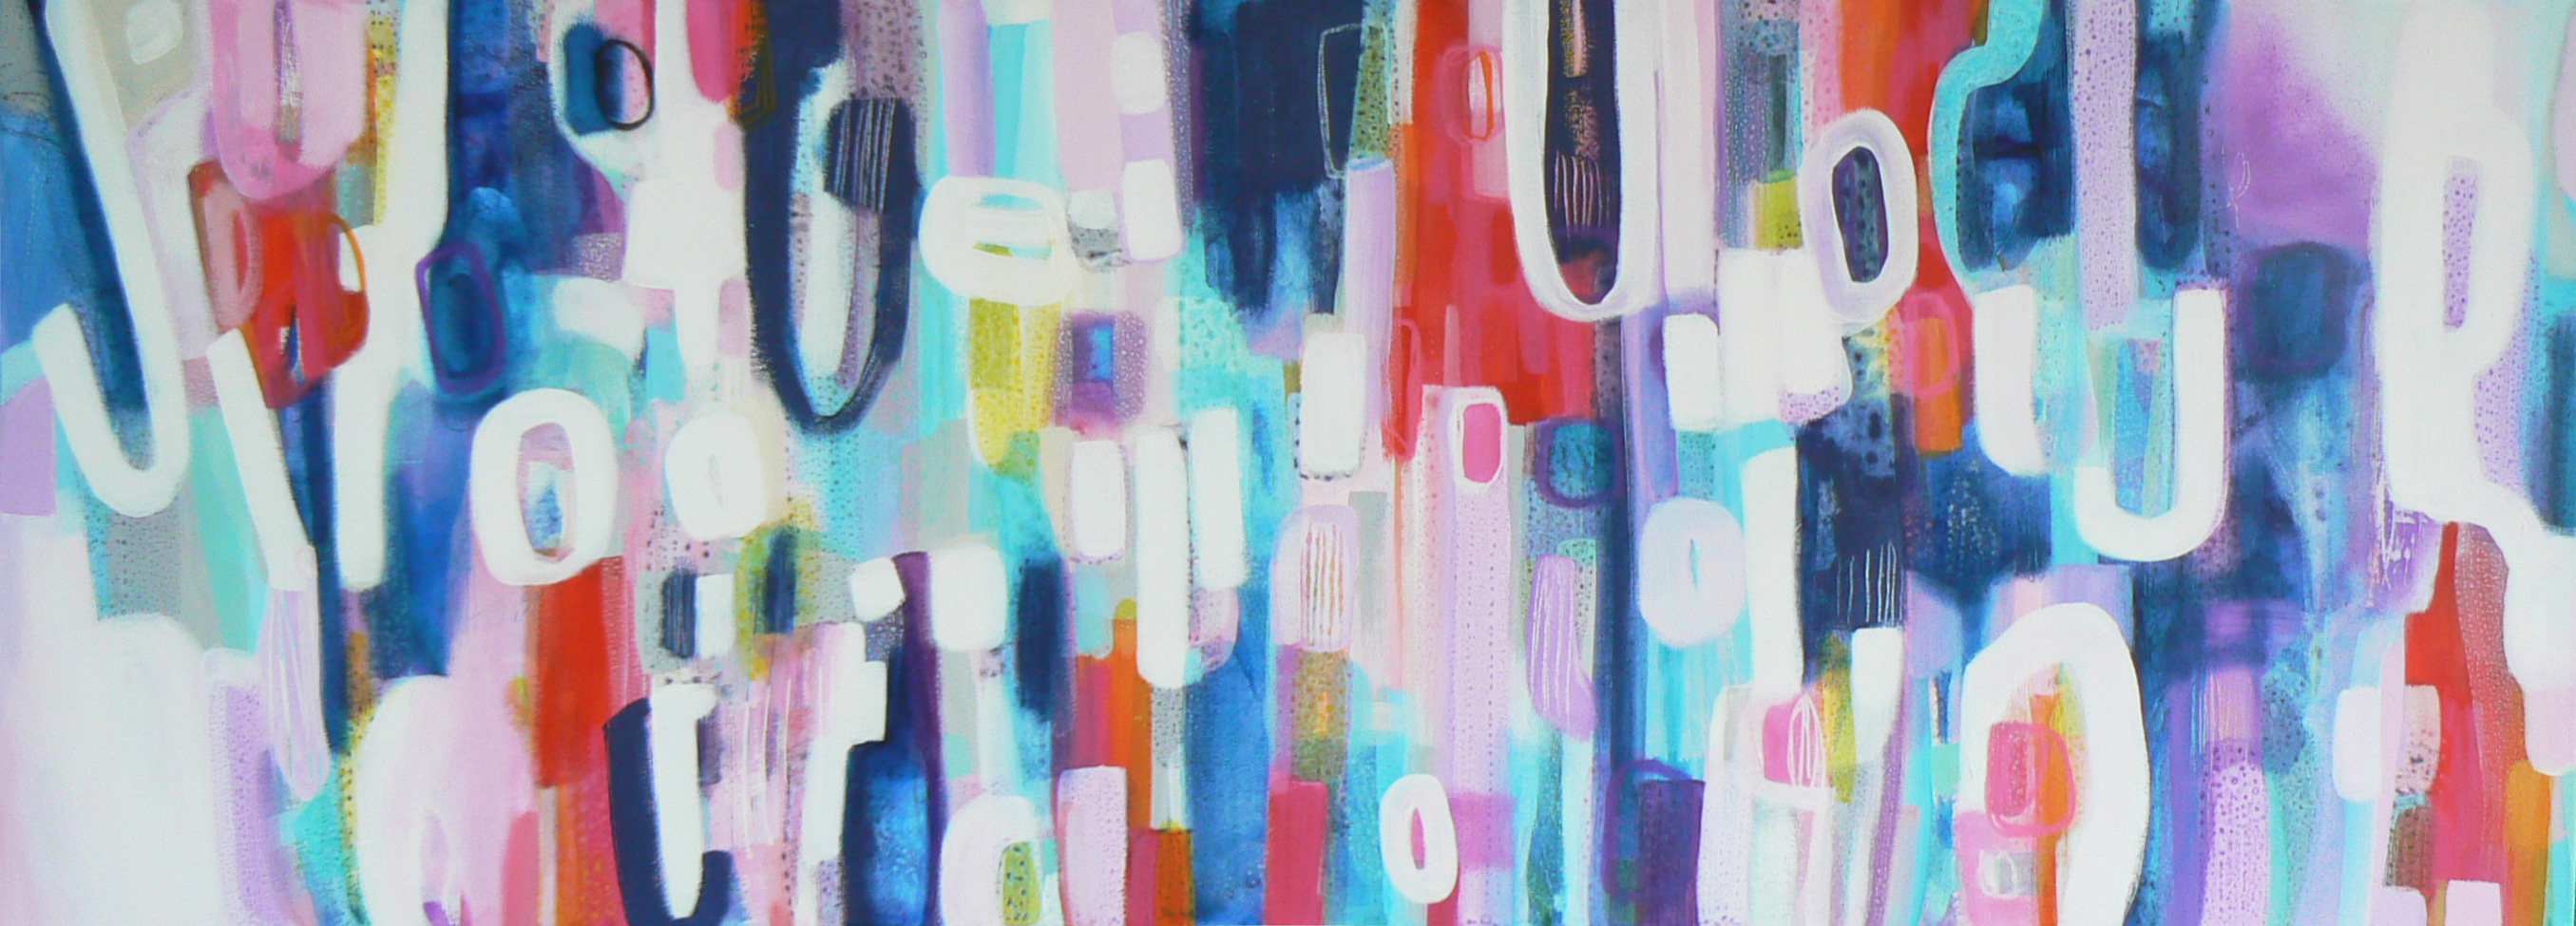 Words not spoken, 2016 Acrylic painting by Carolynne Coulson